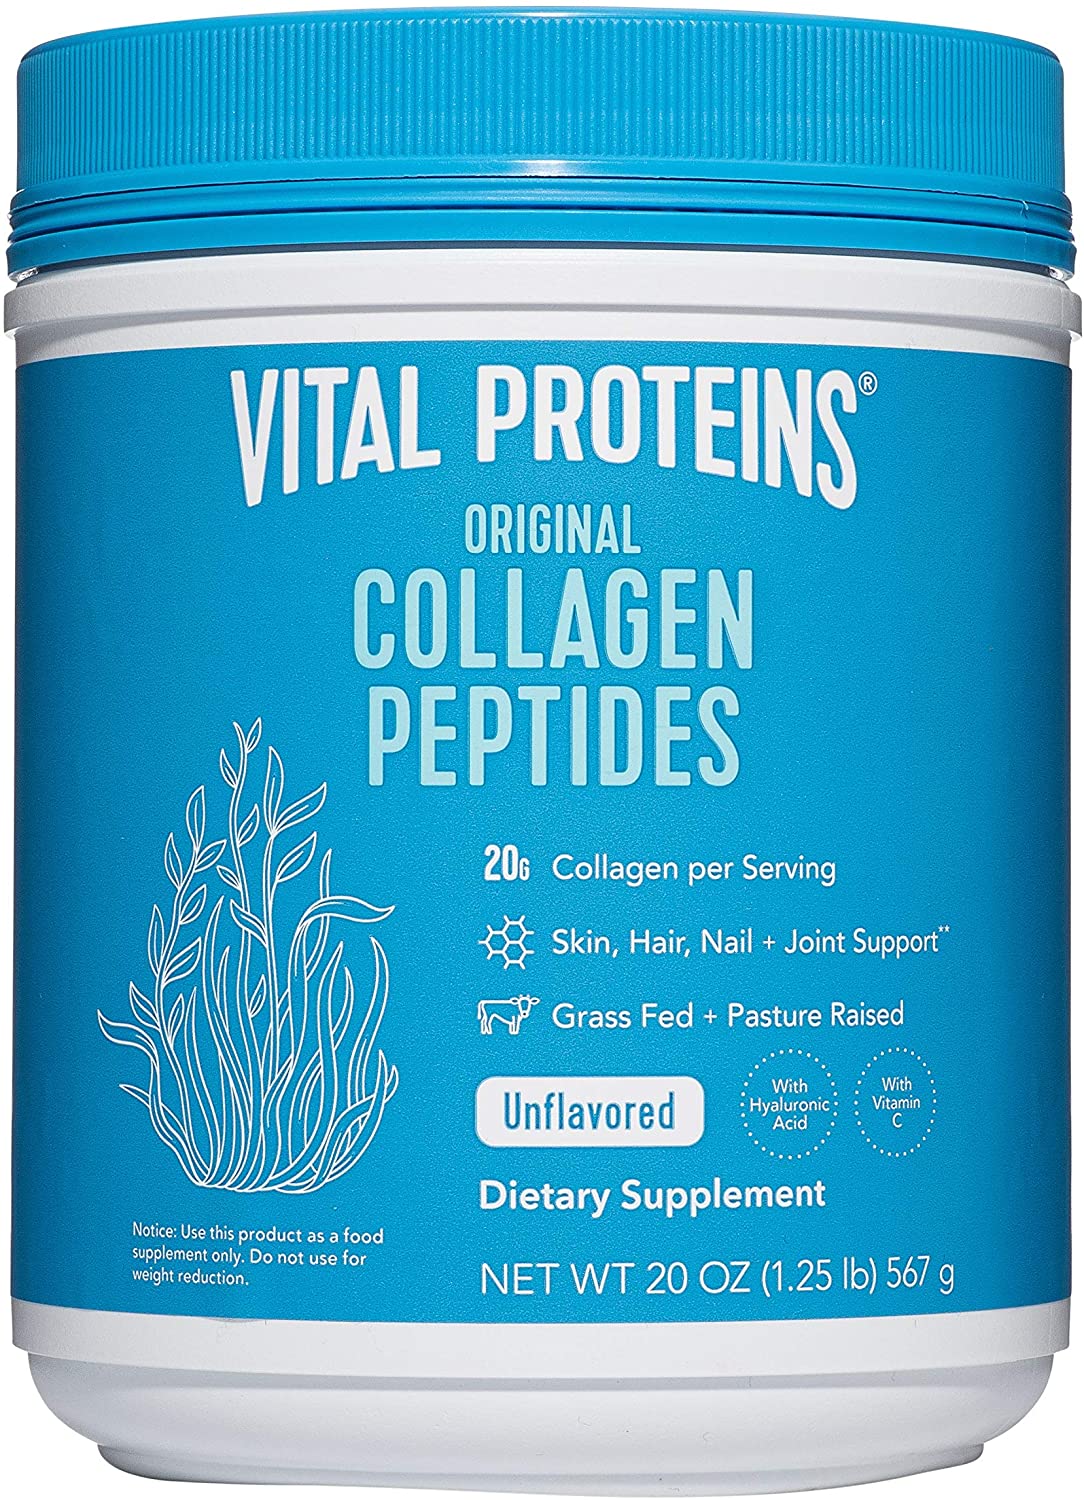 Vital Proteins Hydrolyzed Collagen Peptides Powder,Best Paint Color For Ceilings